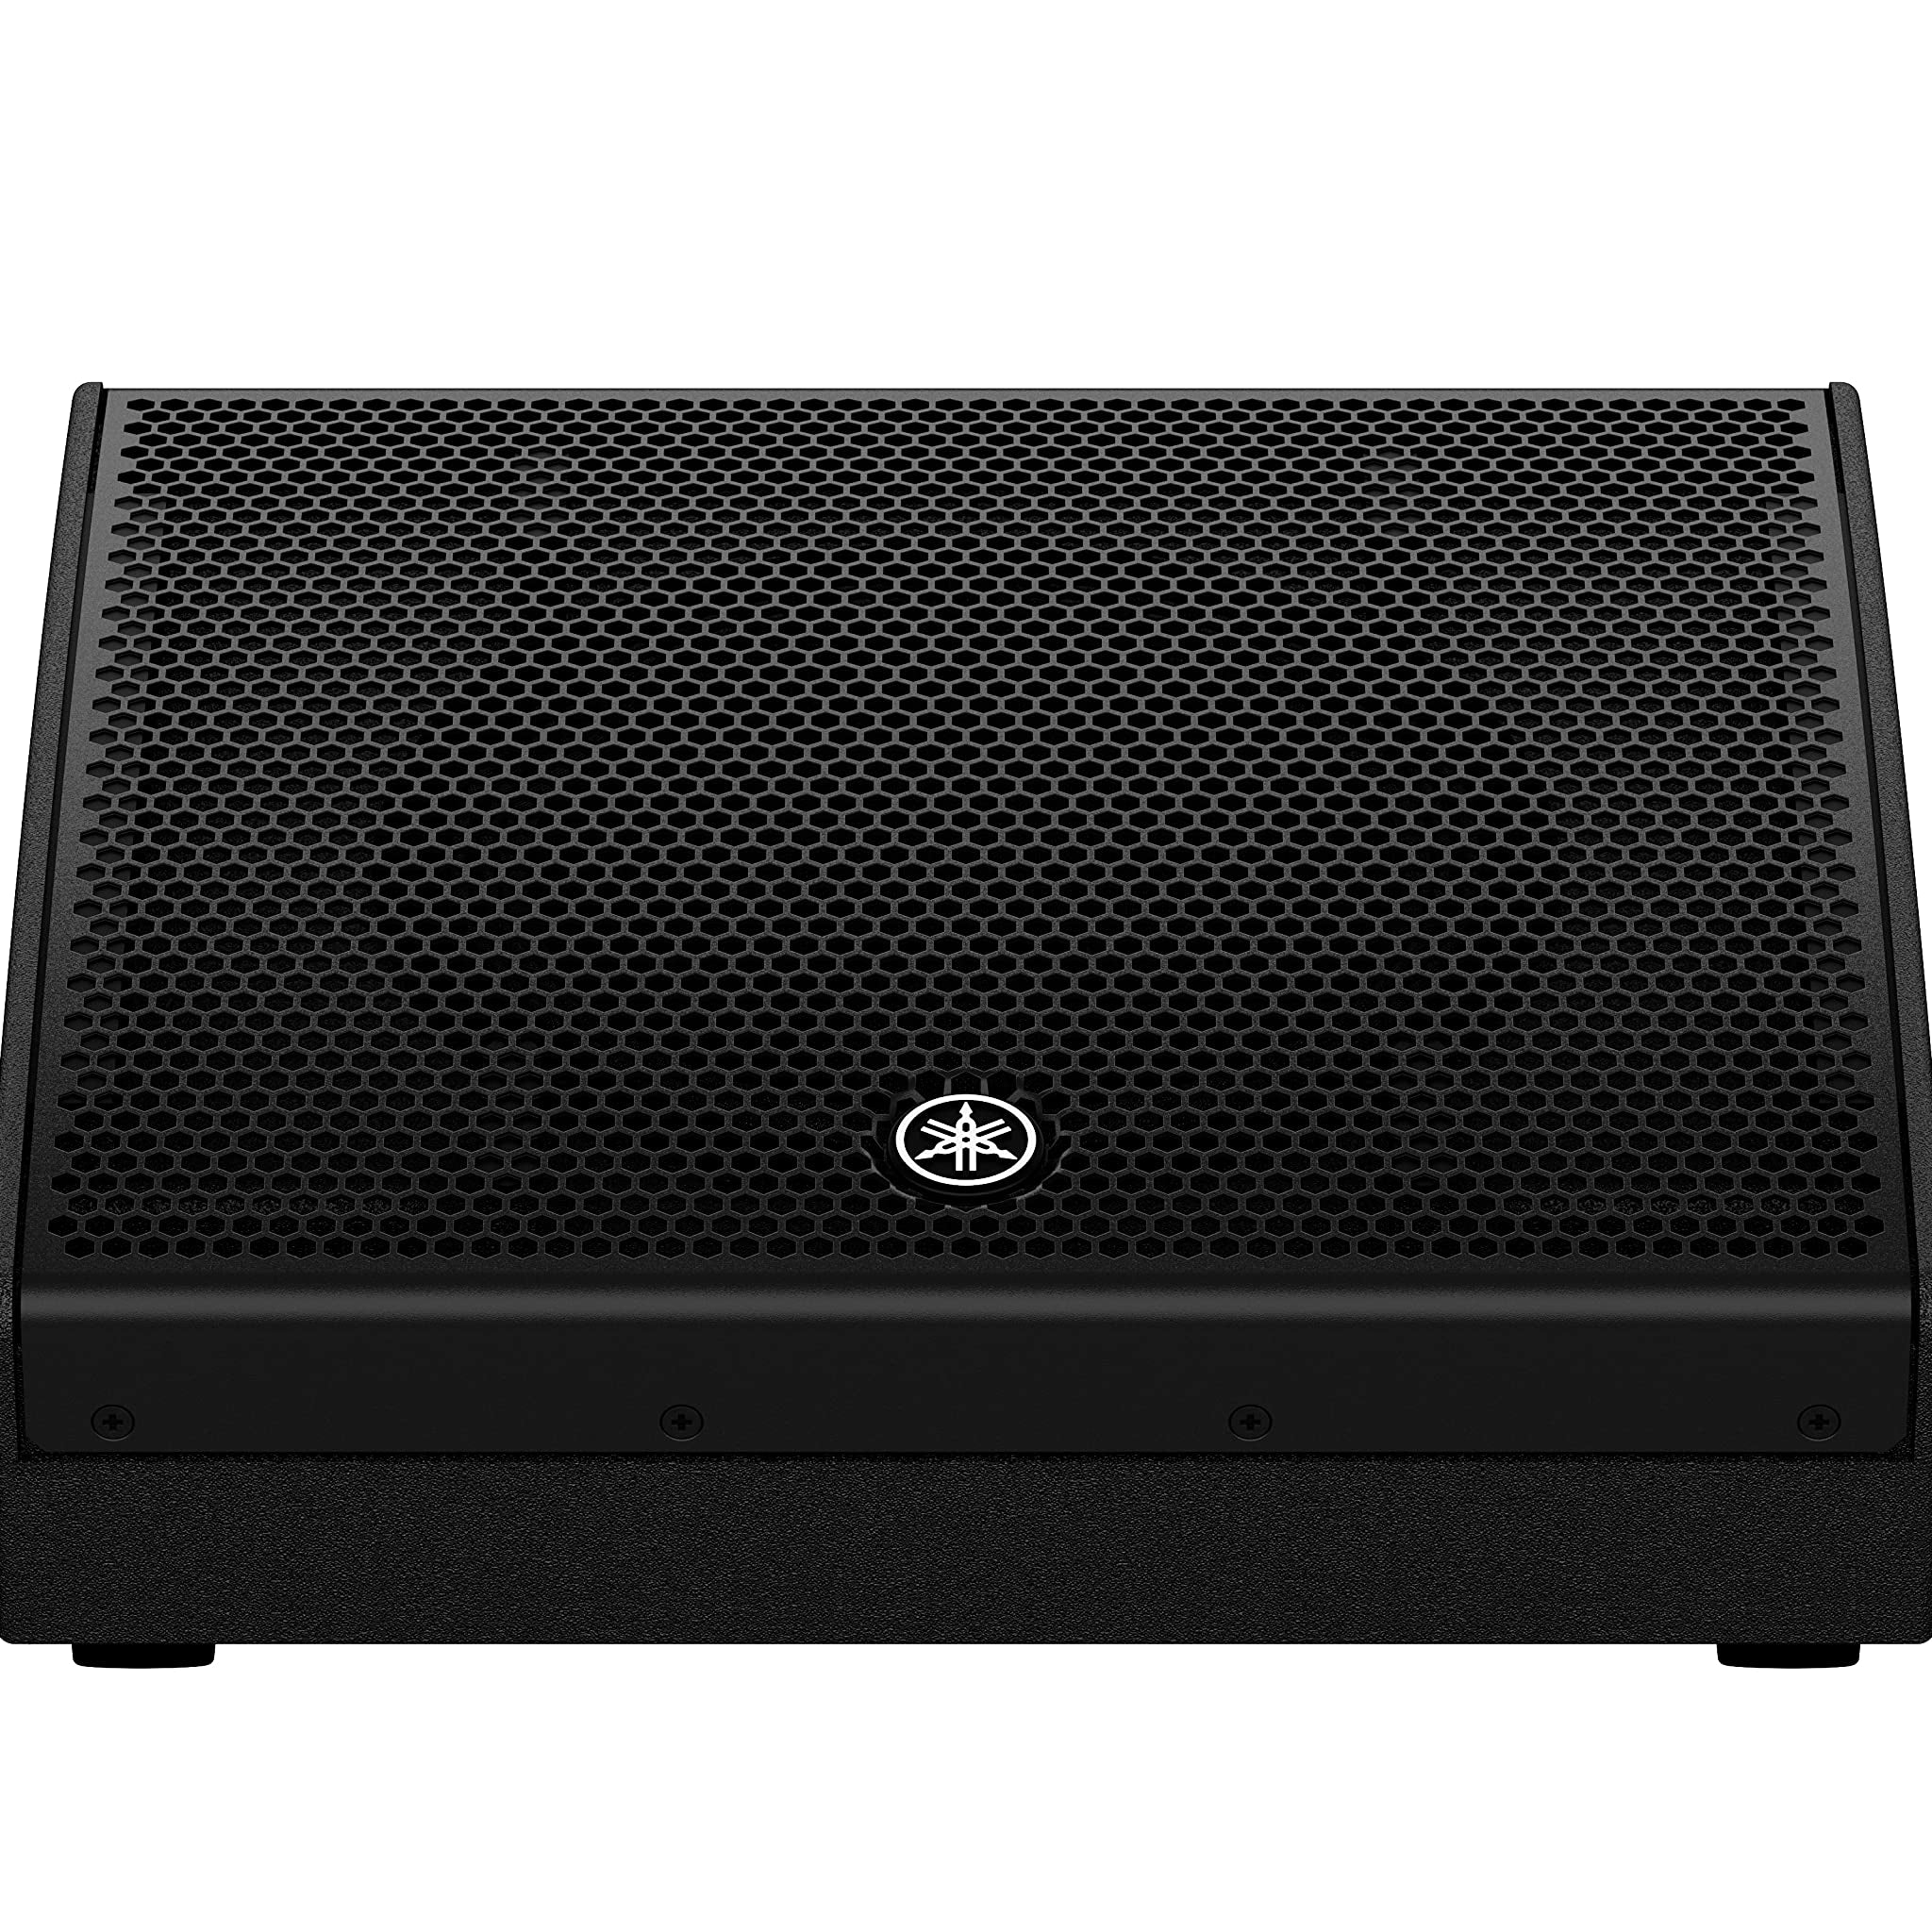 Yamaha DHR12M (12") Active Floor/Stage Monitor Speaker,1000W Powered Loudspeaker with Coaxial 12" LF and 1.75" HF Drivers (Each)